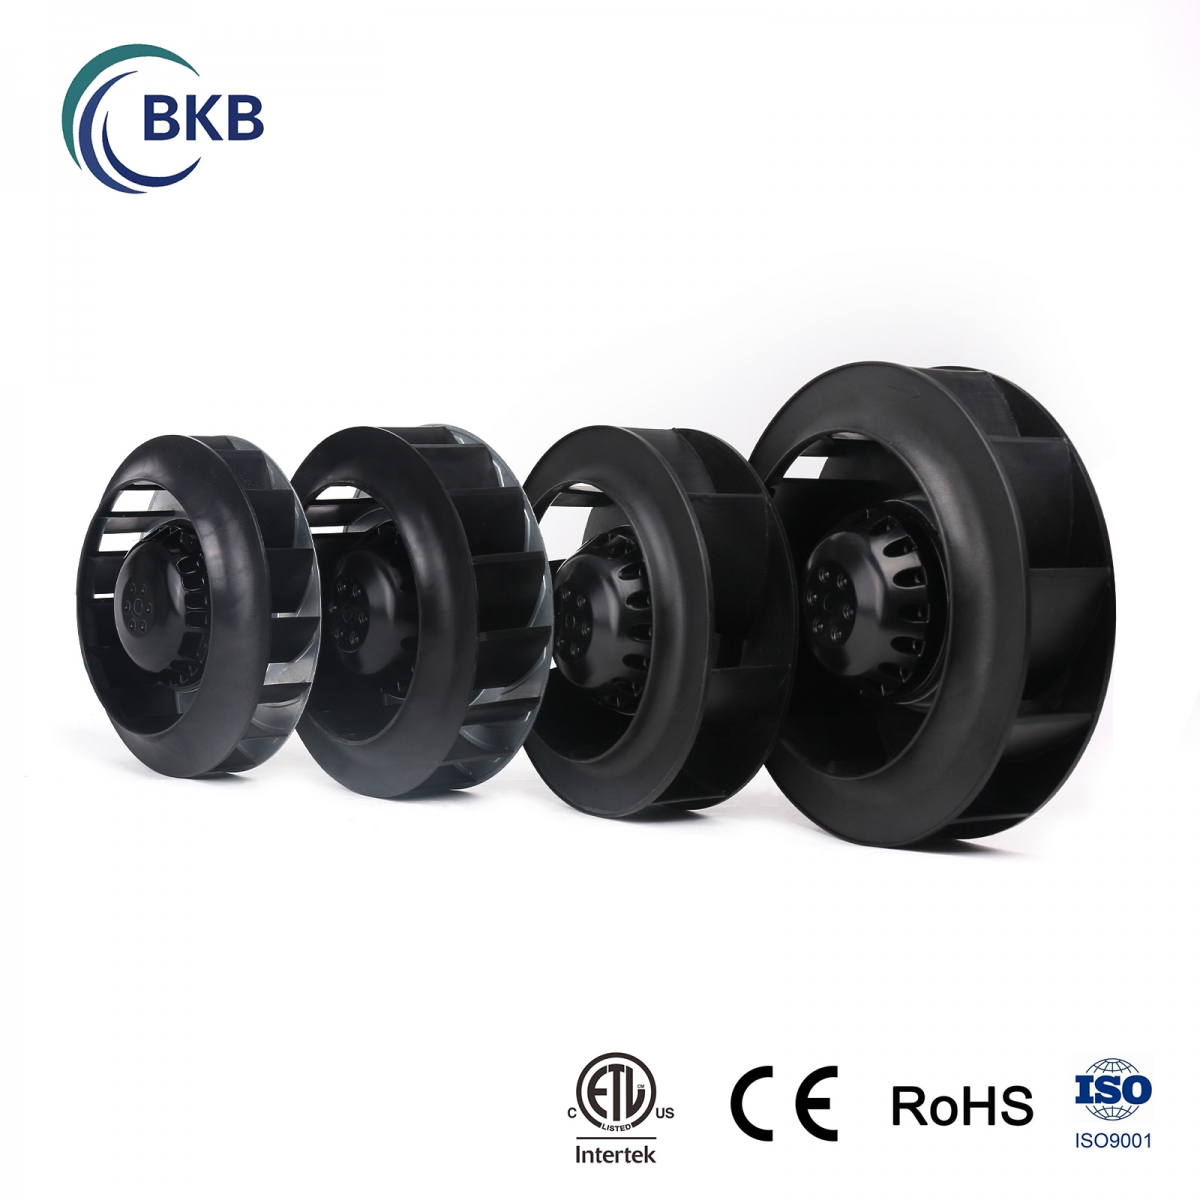 ETL LISTED Plastic backward curved centrifugal fan φ 180H50 SUPPLIER AND FACTORY IN CHINA .-SUNLIGHT BLOWER,Centrifugal Fans, Inline Fans,Motors,Backward curved centrifugal fans ,Forward curved centrifugal fans ,inlet fans, EC fans